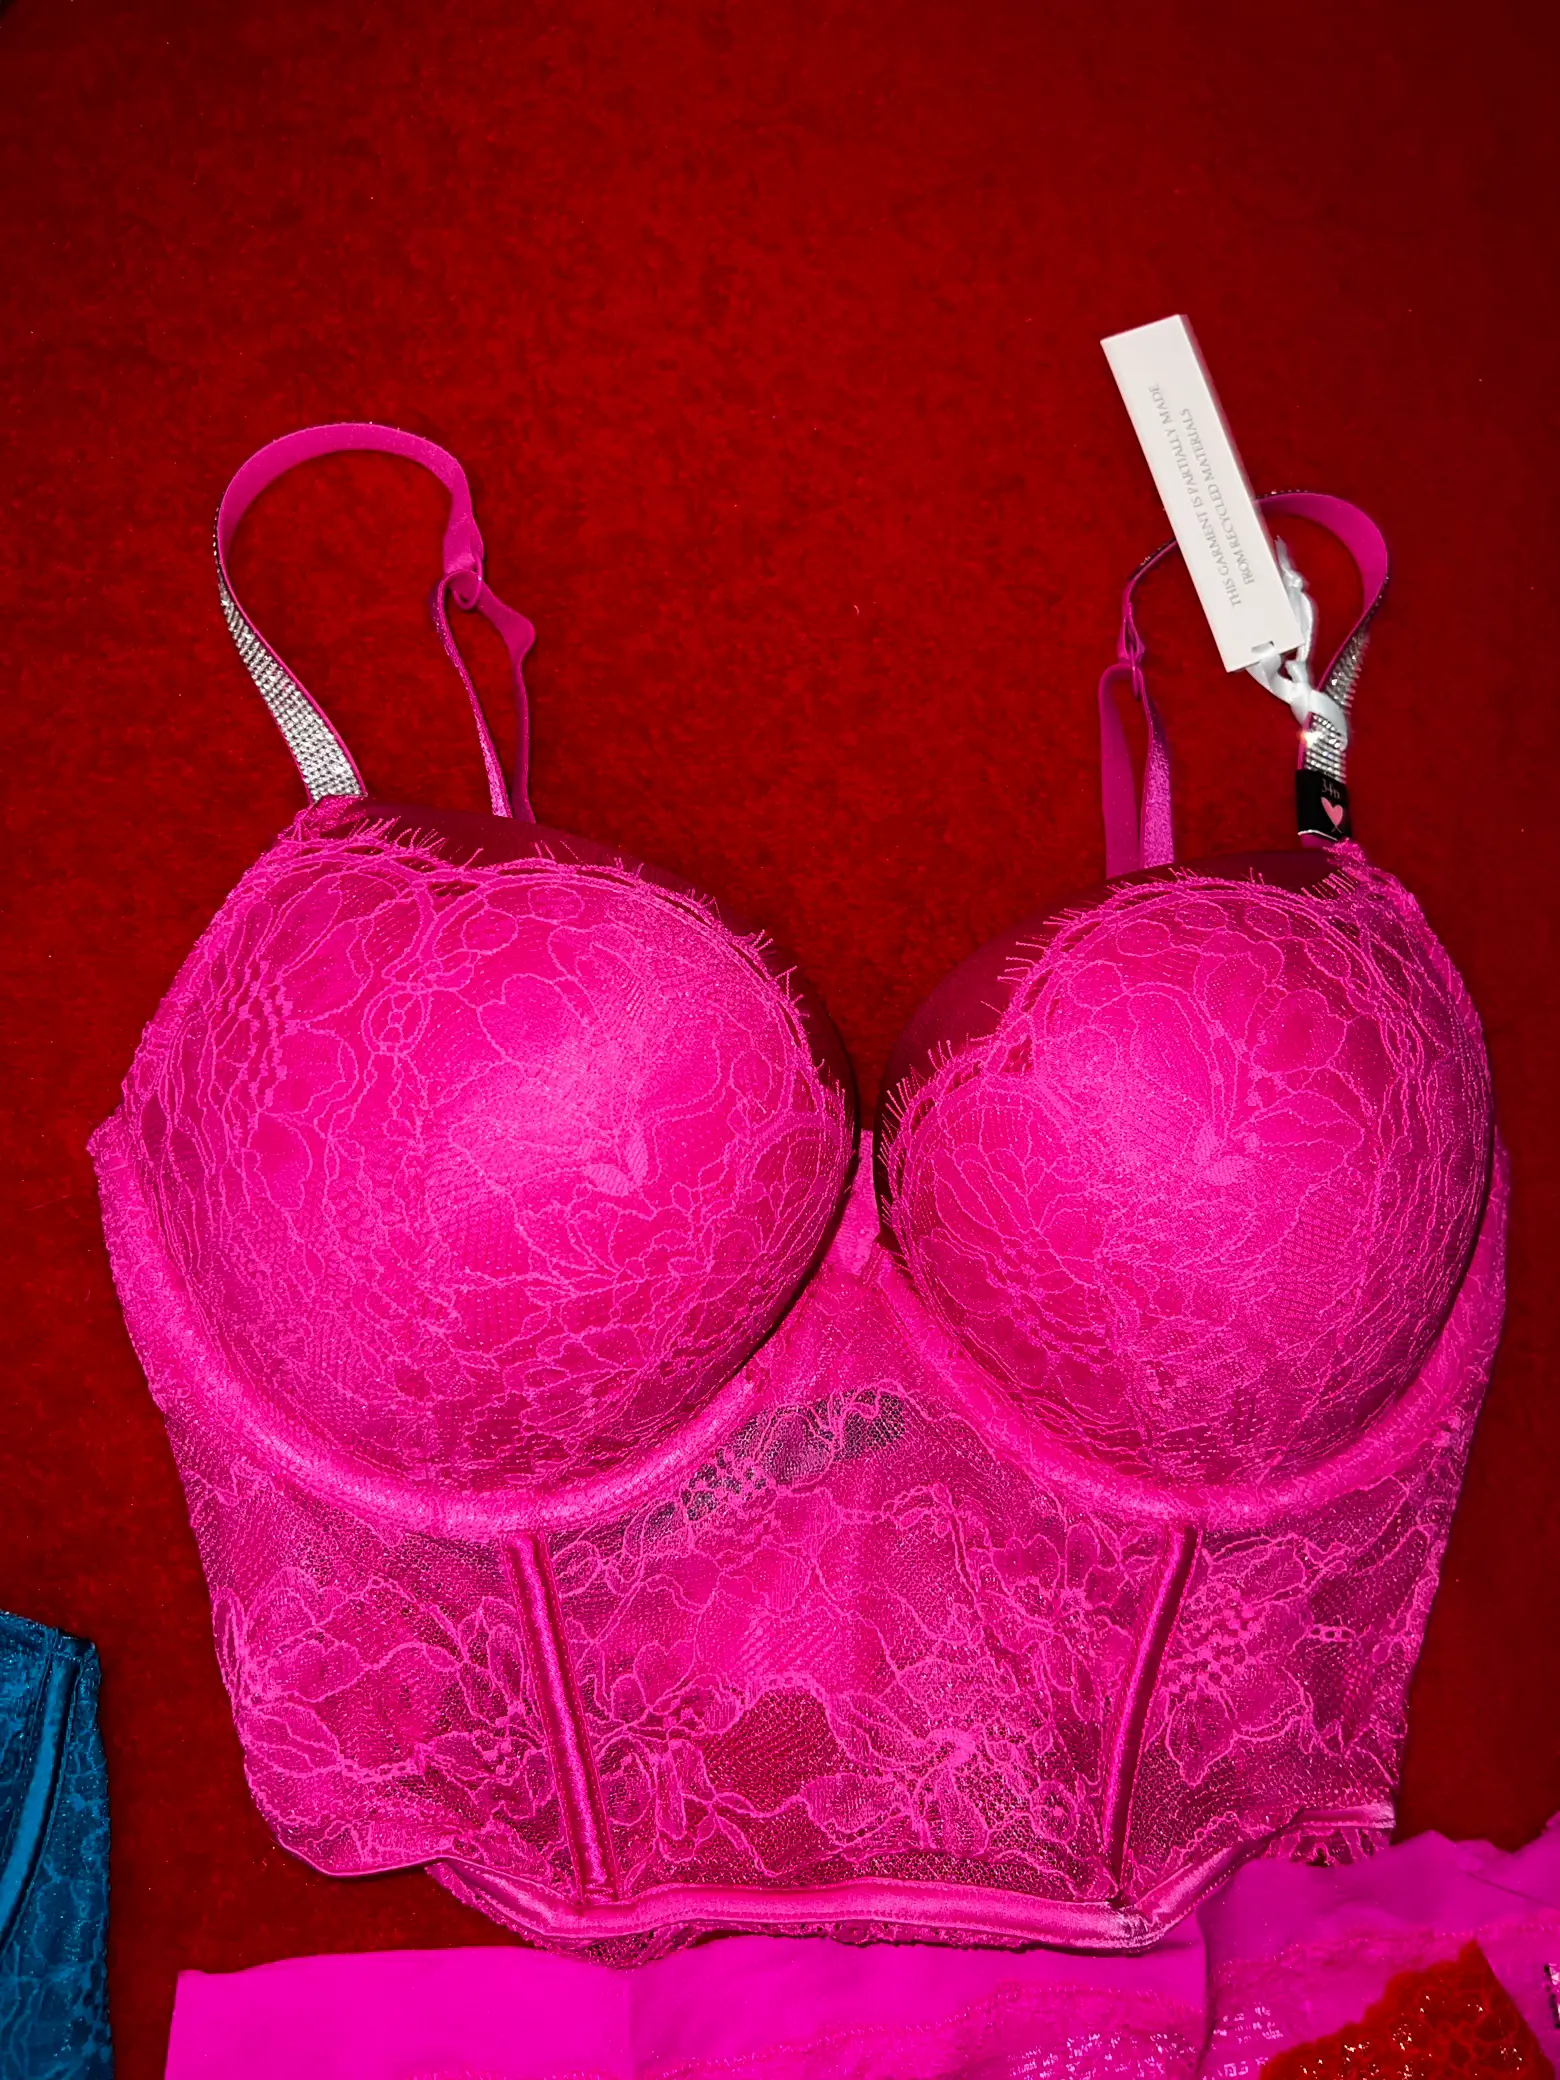 Victoria's Secret Lingerie for sale in Cherry Gardens, South